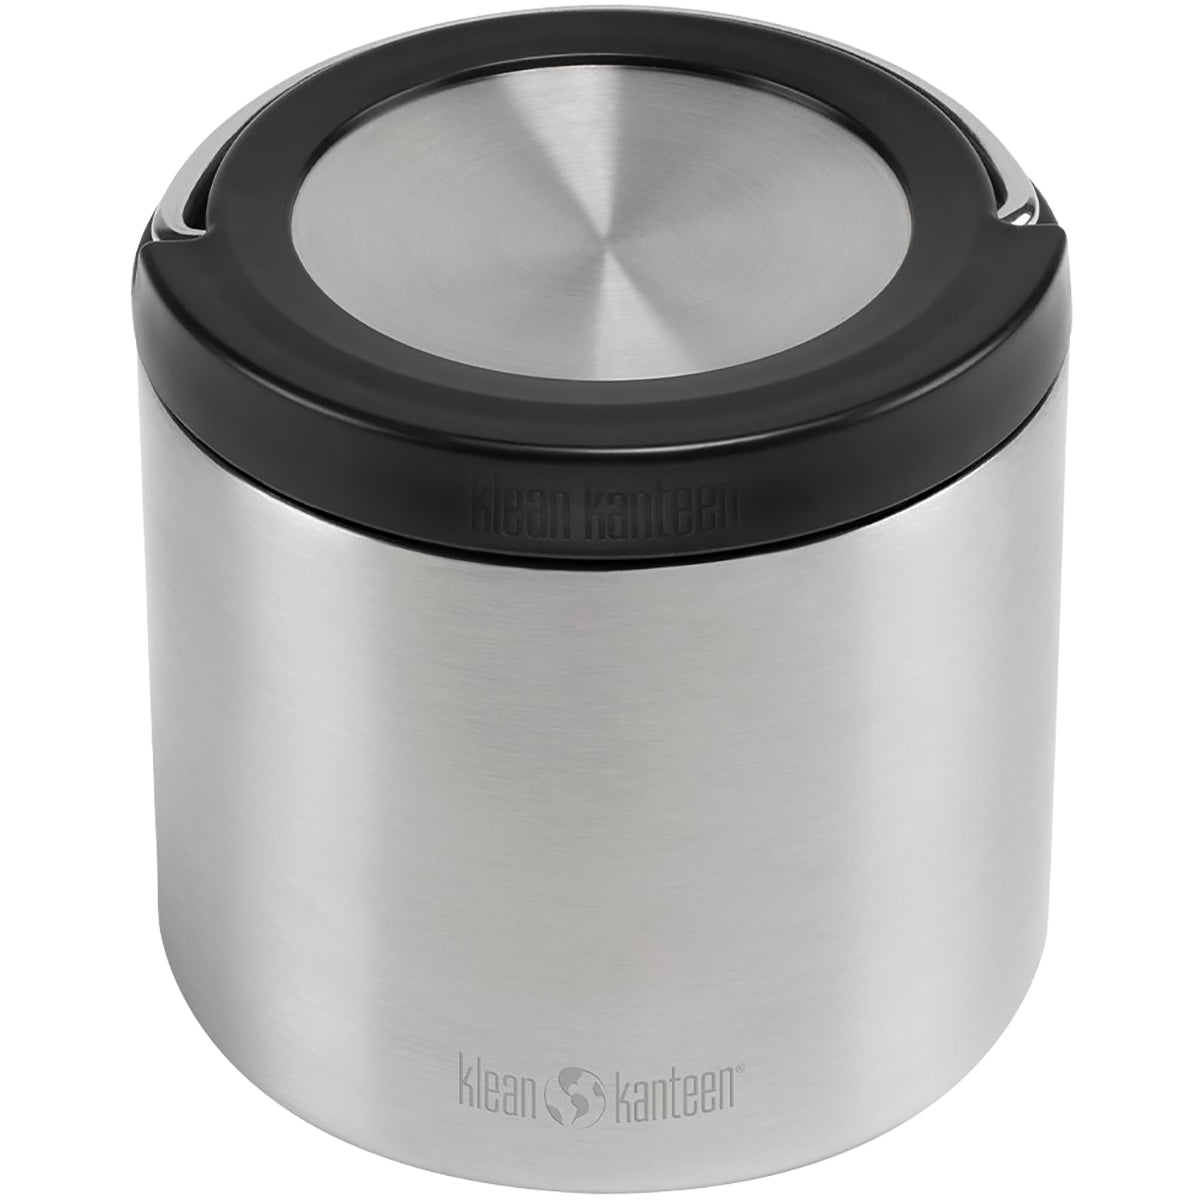 Klean Kanteen Brushed Stainless Steel TKCanister with Insulated Lid Klean Kanteen